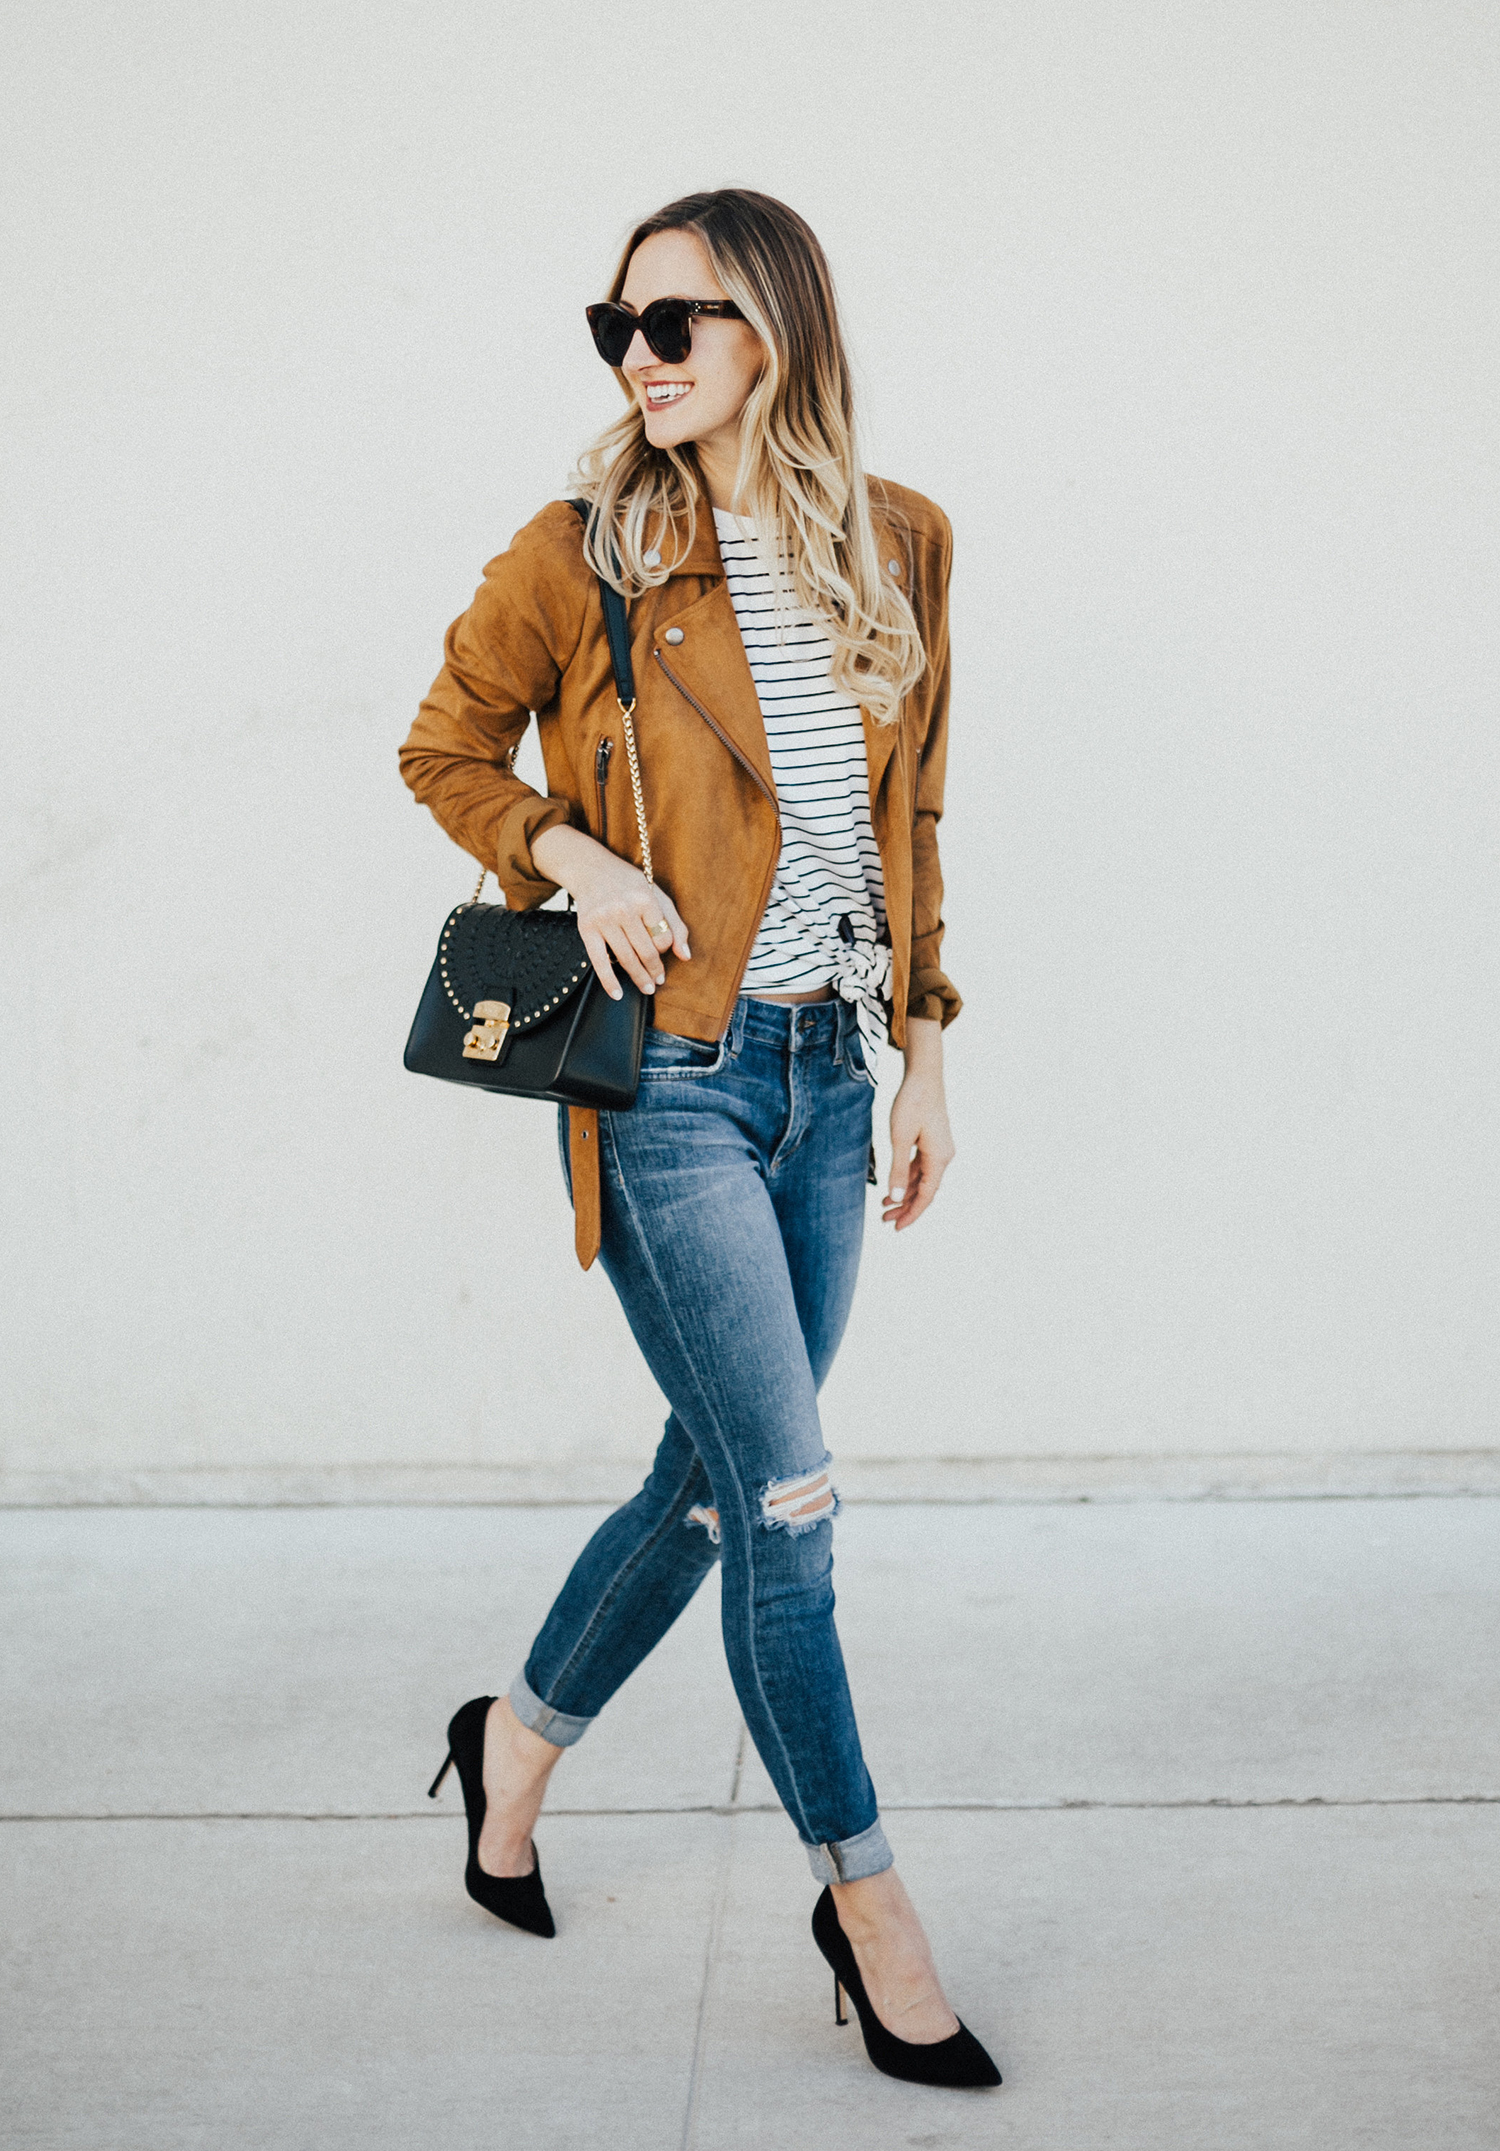 Tan Suede Pumps Outfits (175 ideas & outfits)